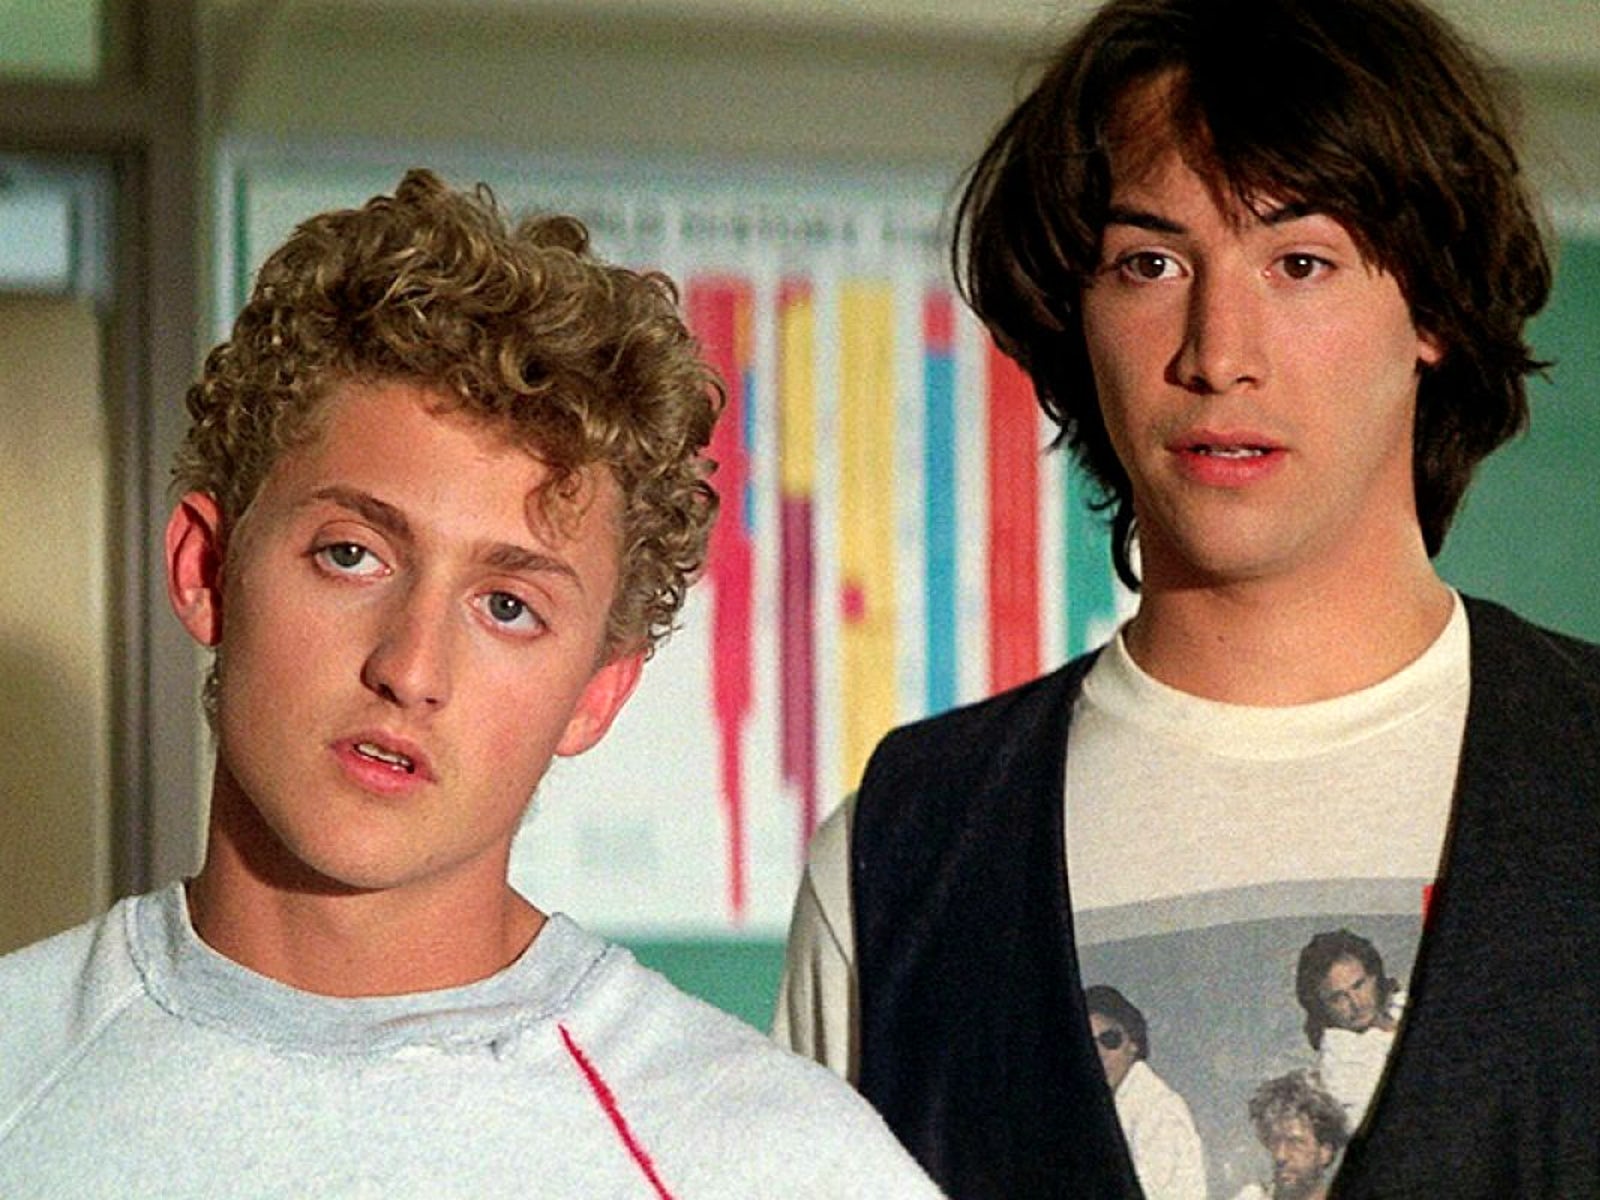 Keanu Reeves and Alex Winter reuniting for 'Bill & Ted 3' movie sequel ...